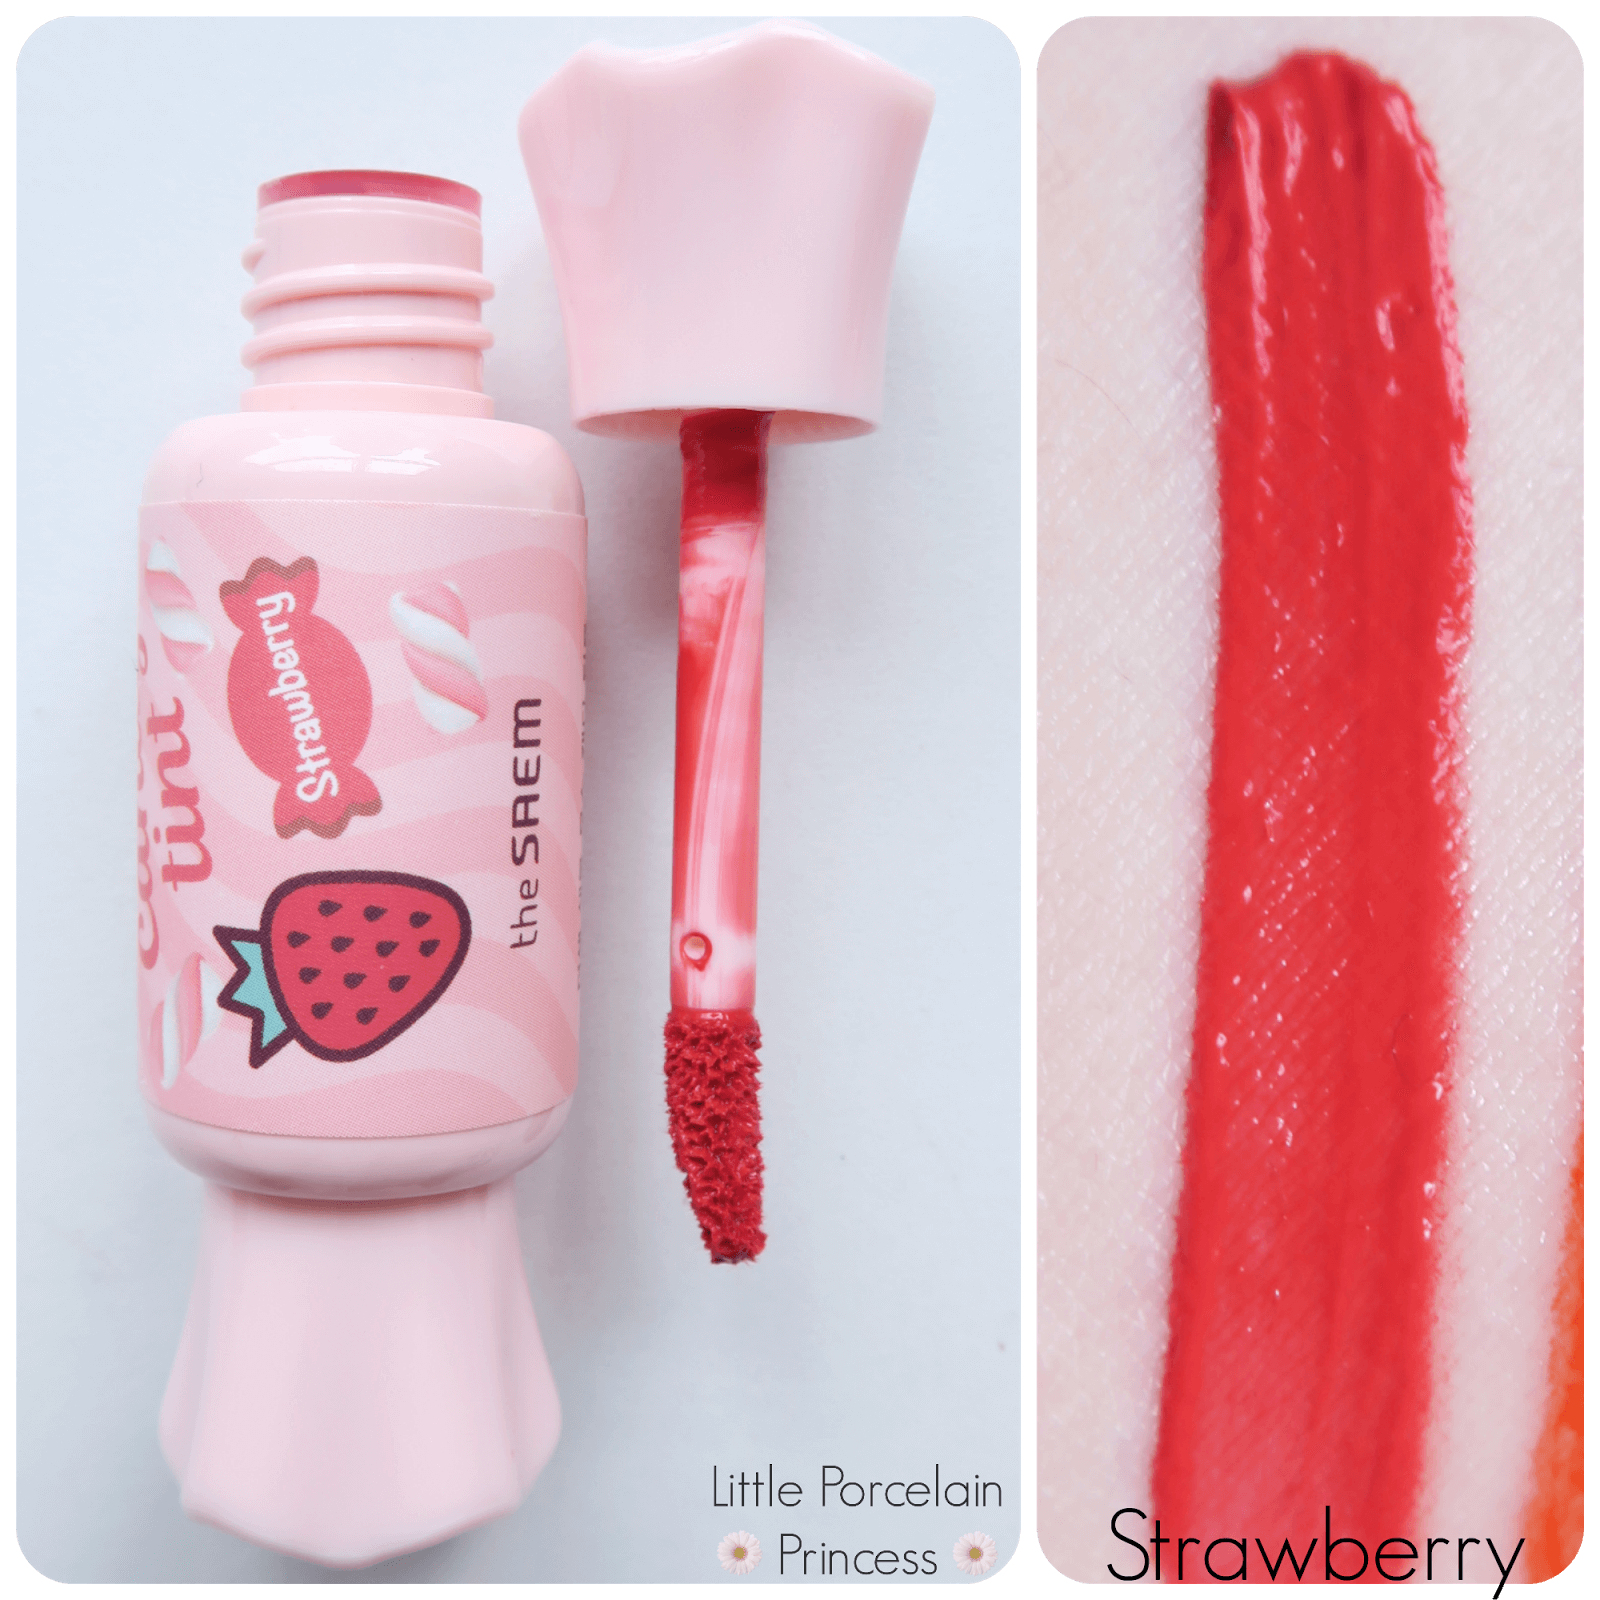 Saemmul Mousse Candy Tint Strawberry 02 [The Saem] . (1)